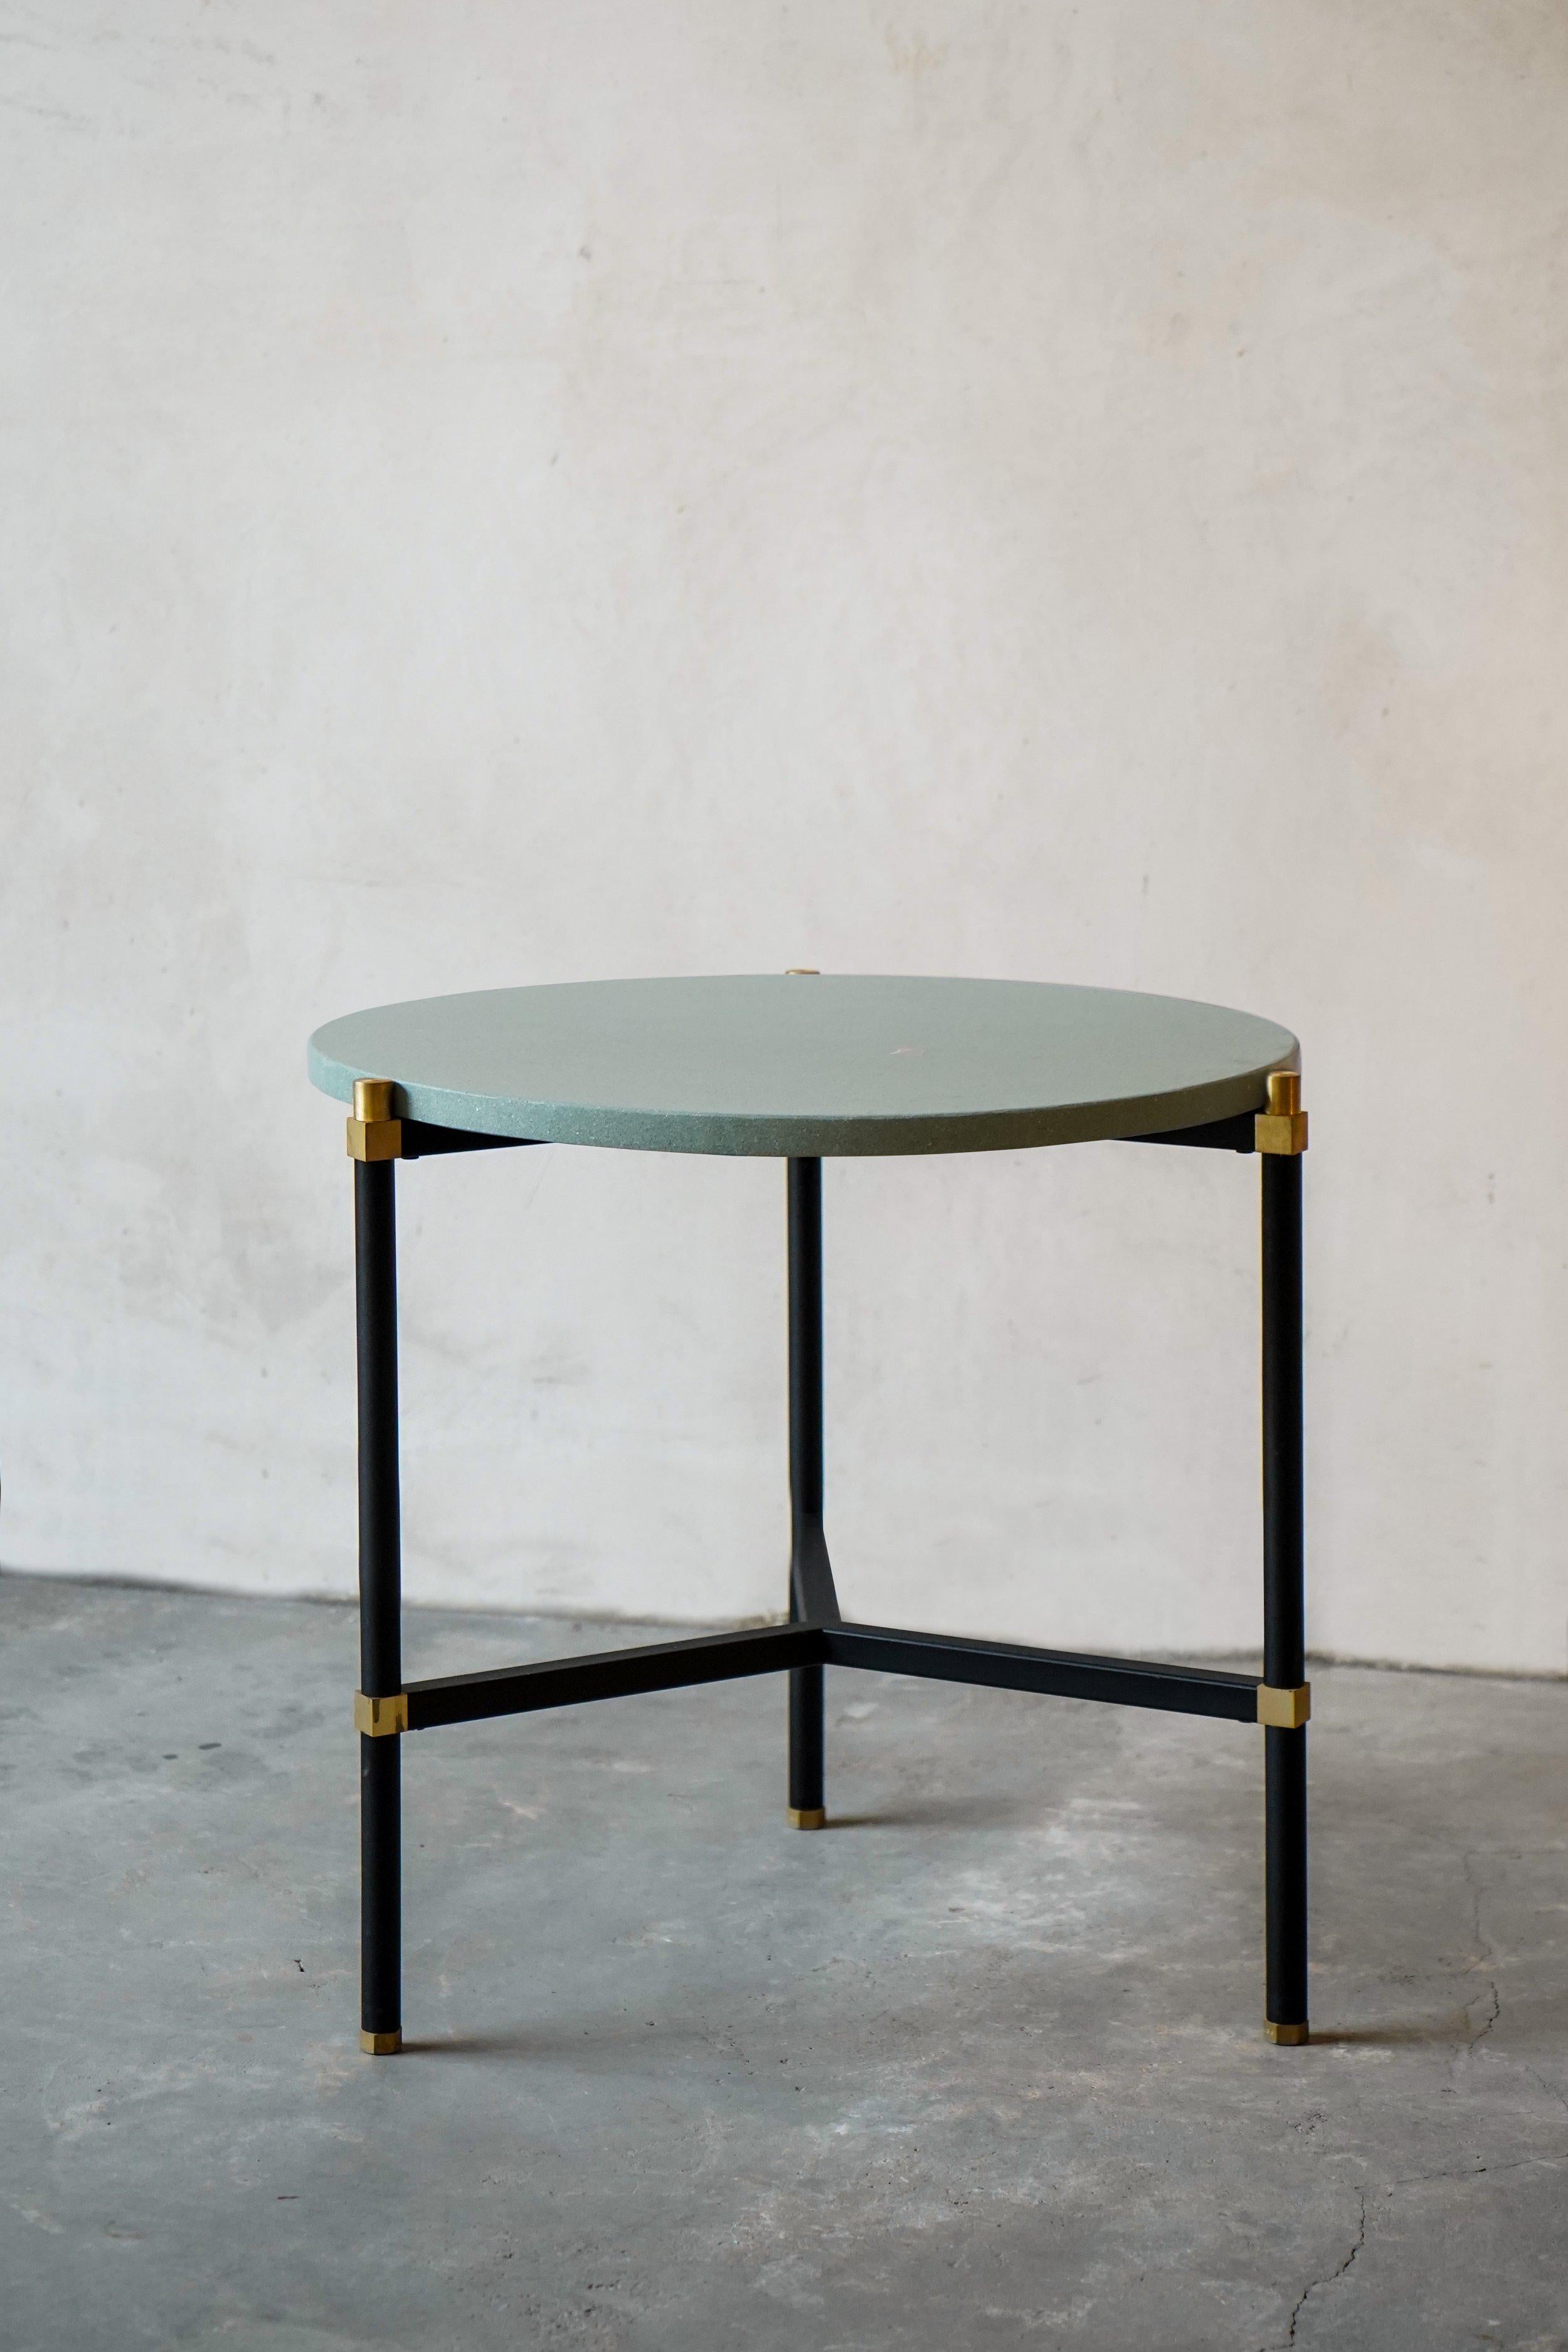 Post-Modern Simple Side Table 50 3 Legs by Contain